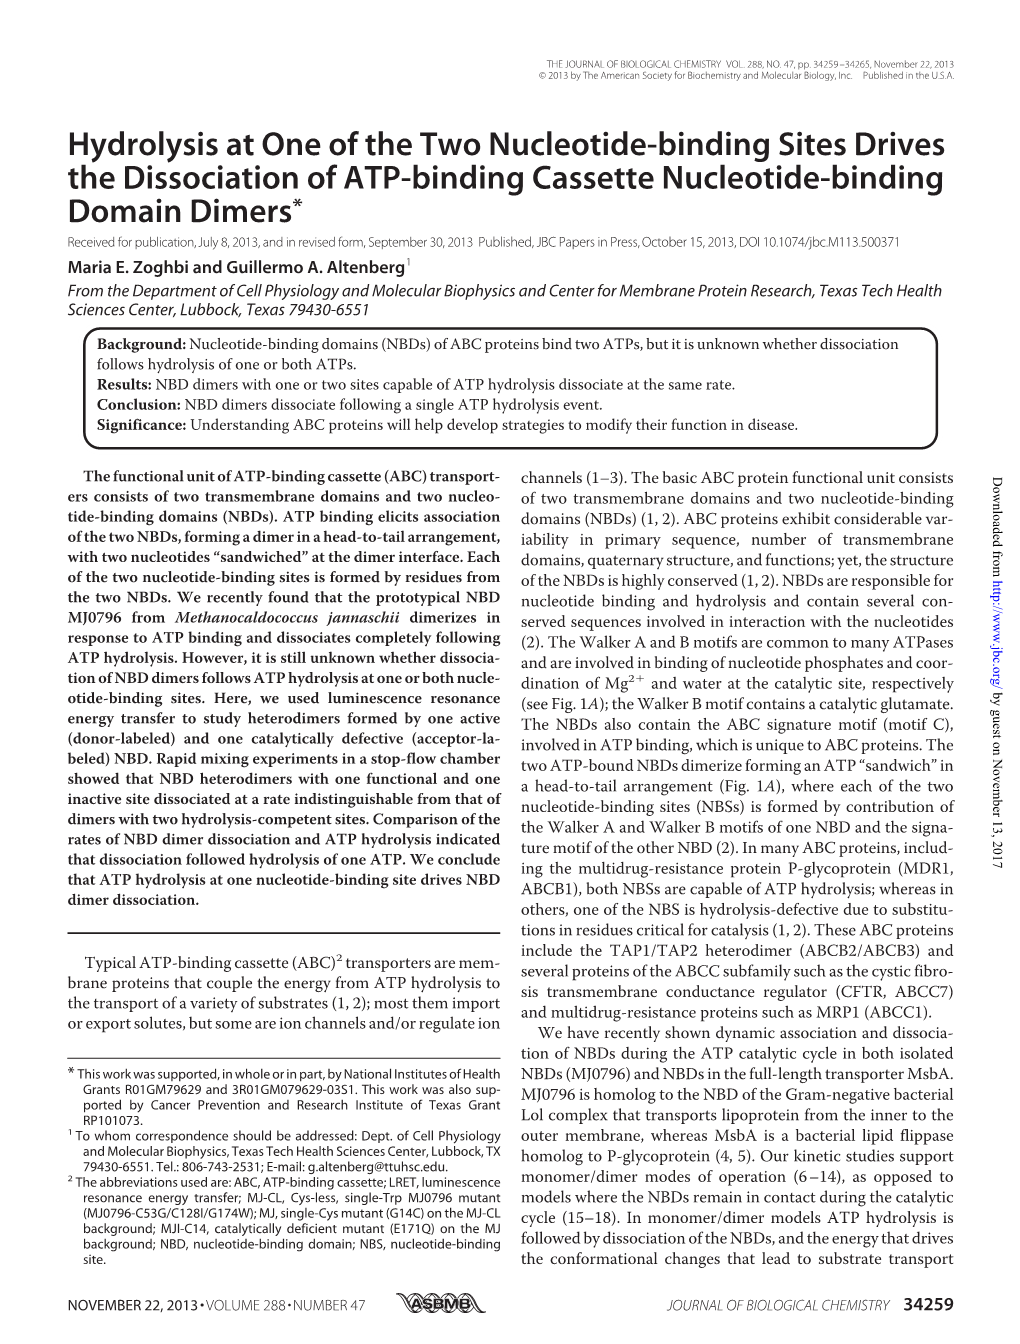 Hydrolysis at One of the Two Nucleotide-Binding Sites Drives The